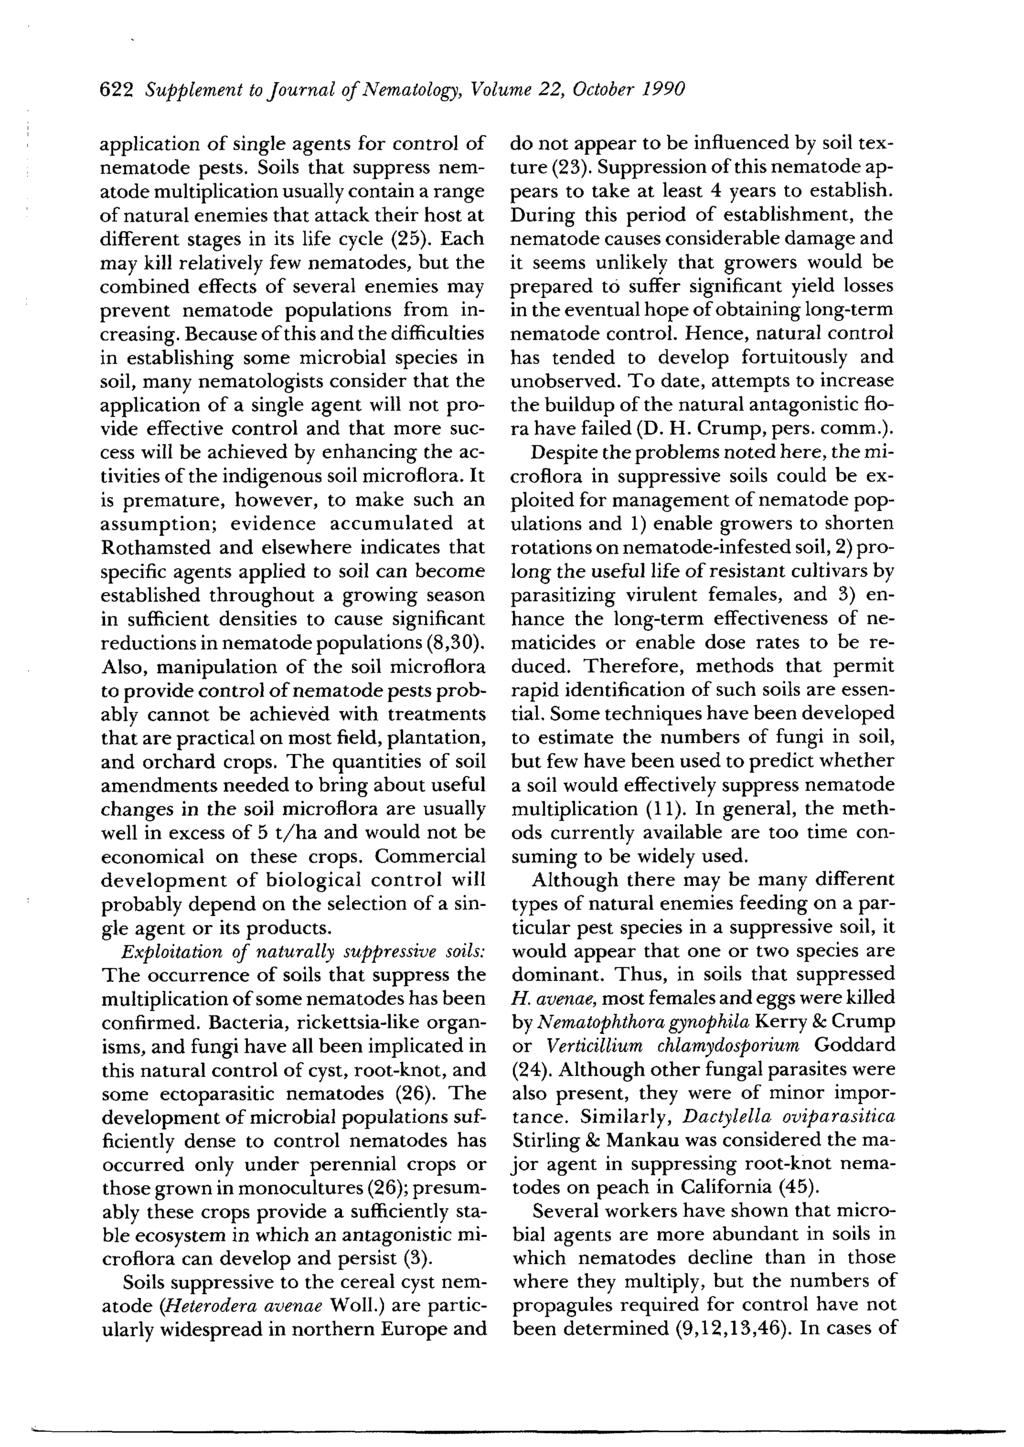 622 Supplement to Journal of Nematology, Volume 22, October 1990 application of single agents for control of nematode pests.